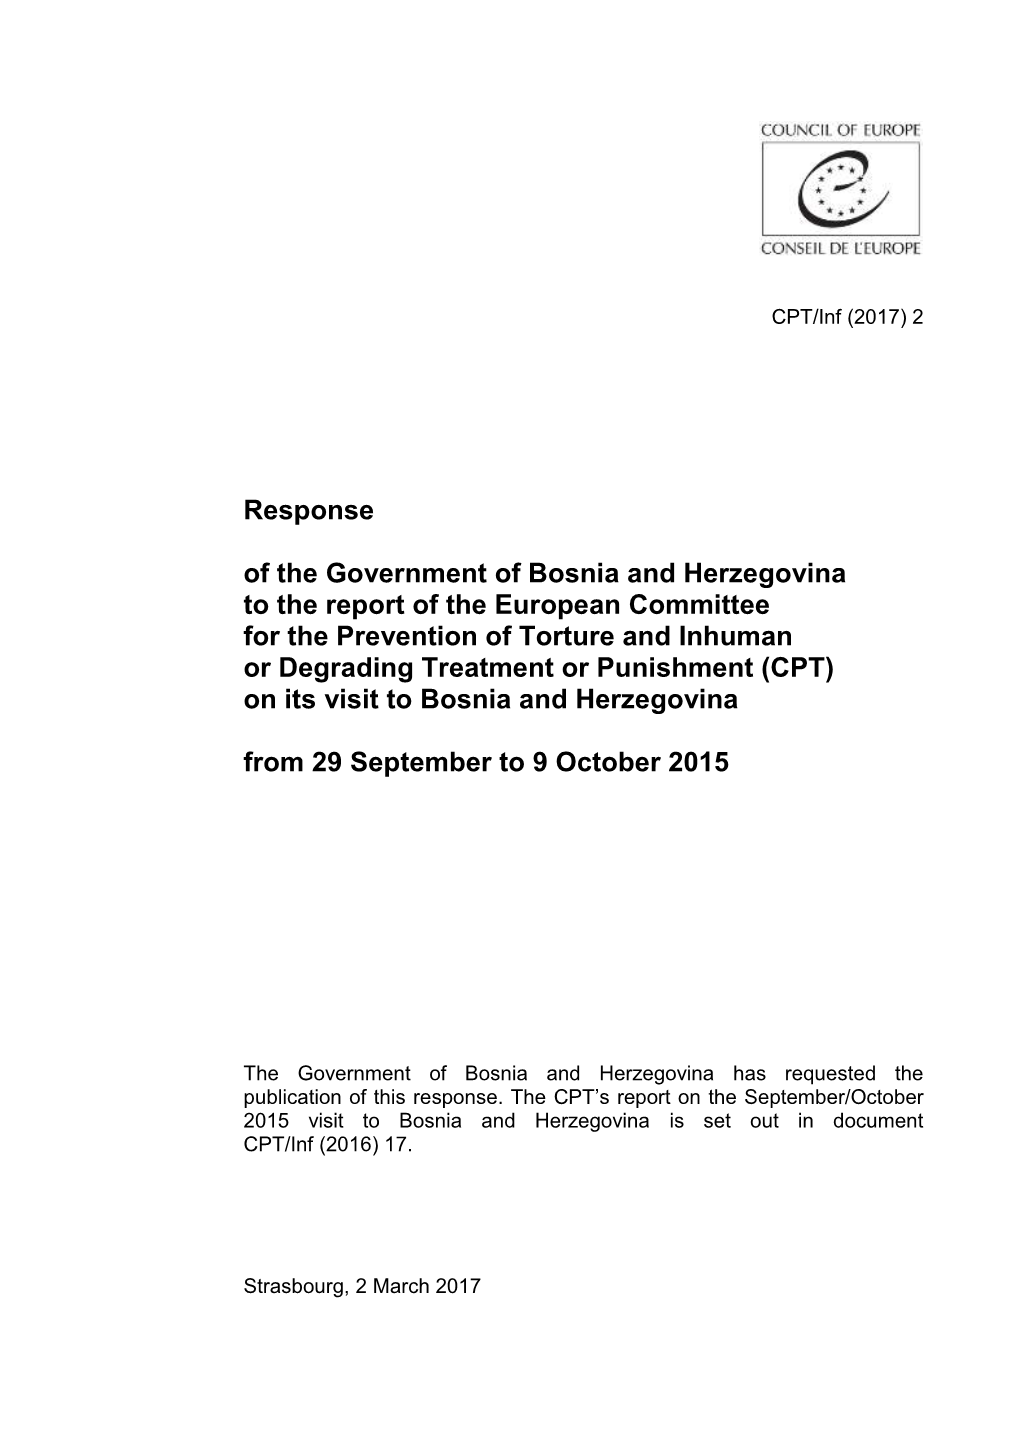 Response of the Government of Bosnia and Herzegovina to The